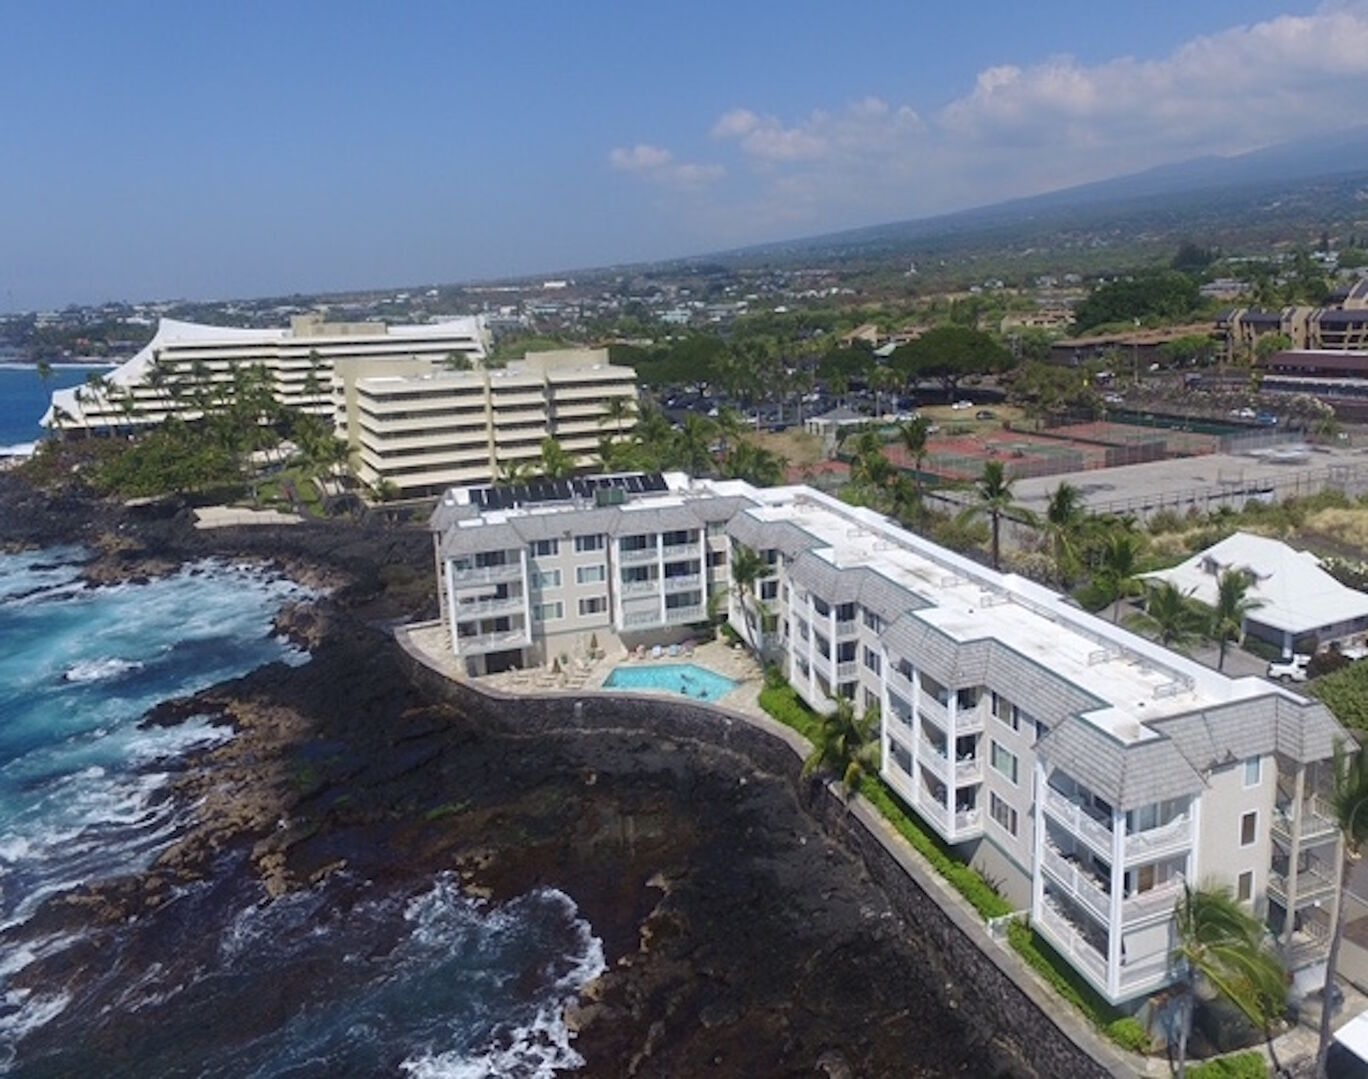 Look how close we are to town.. Just a short walk past Royal Kona resort and Huggos.